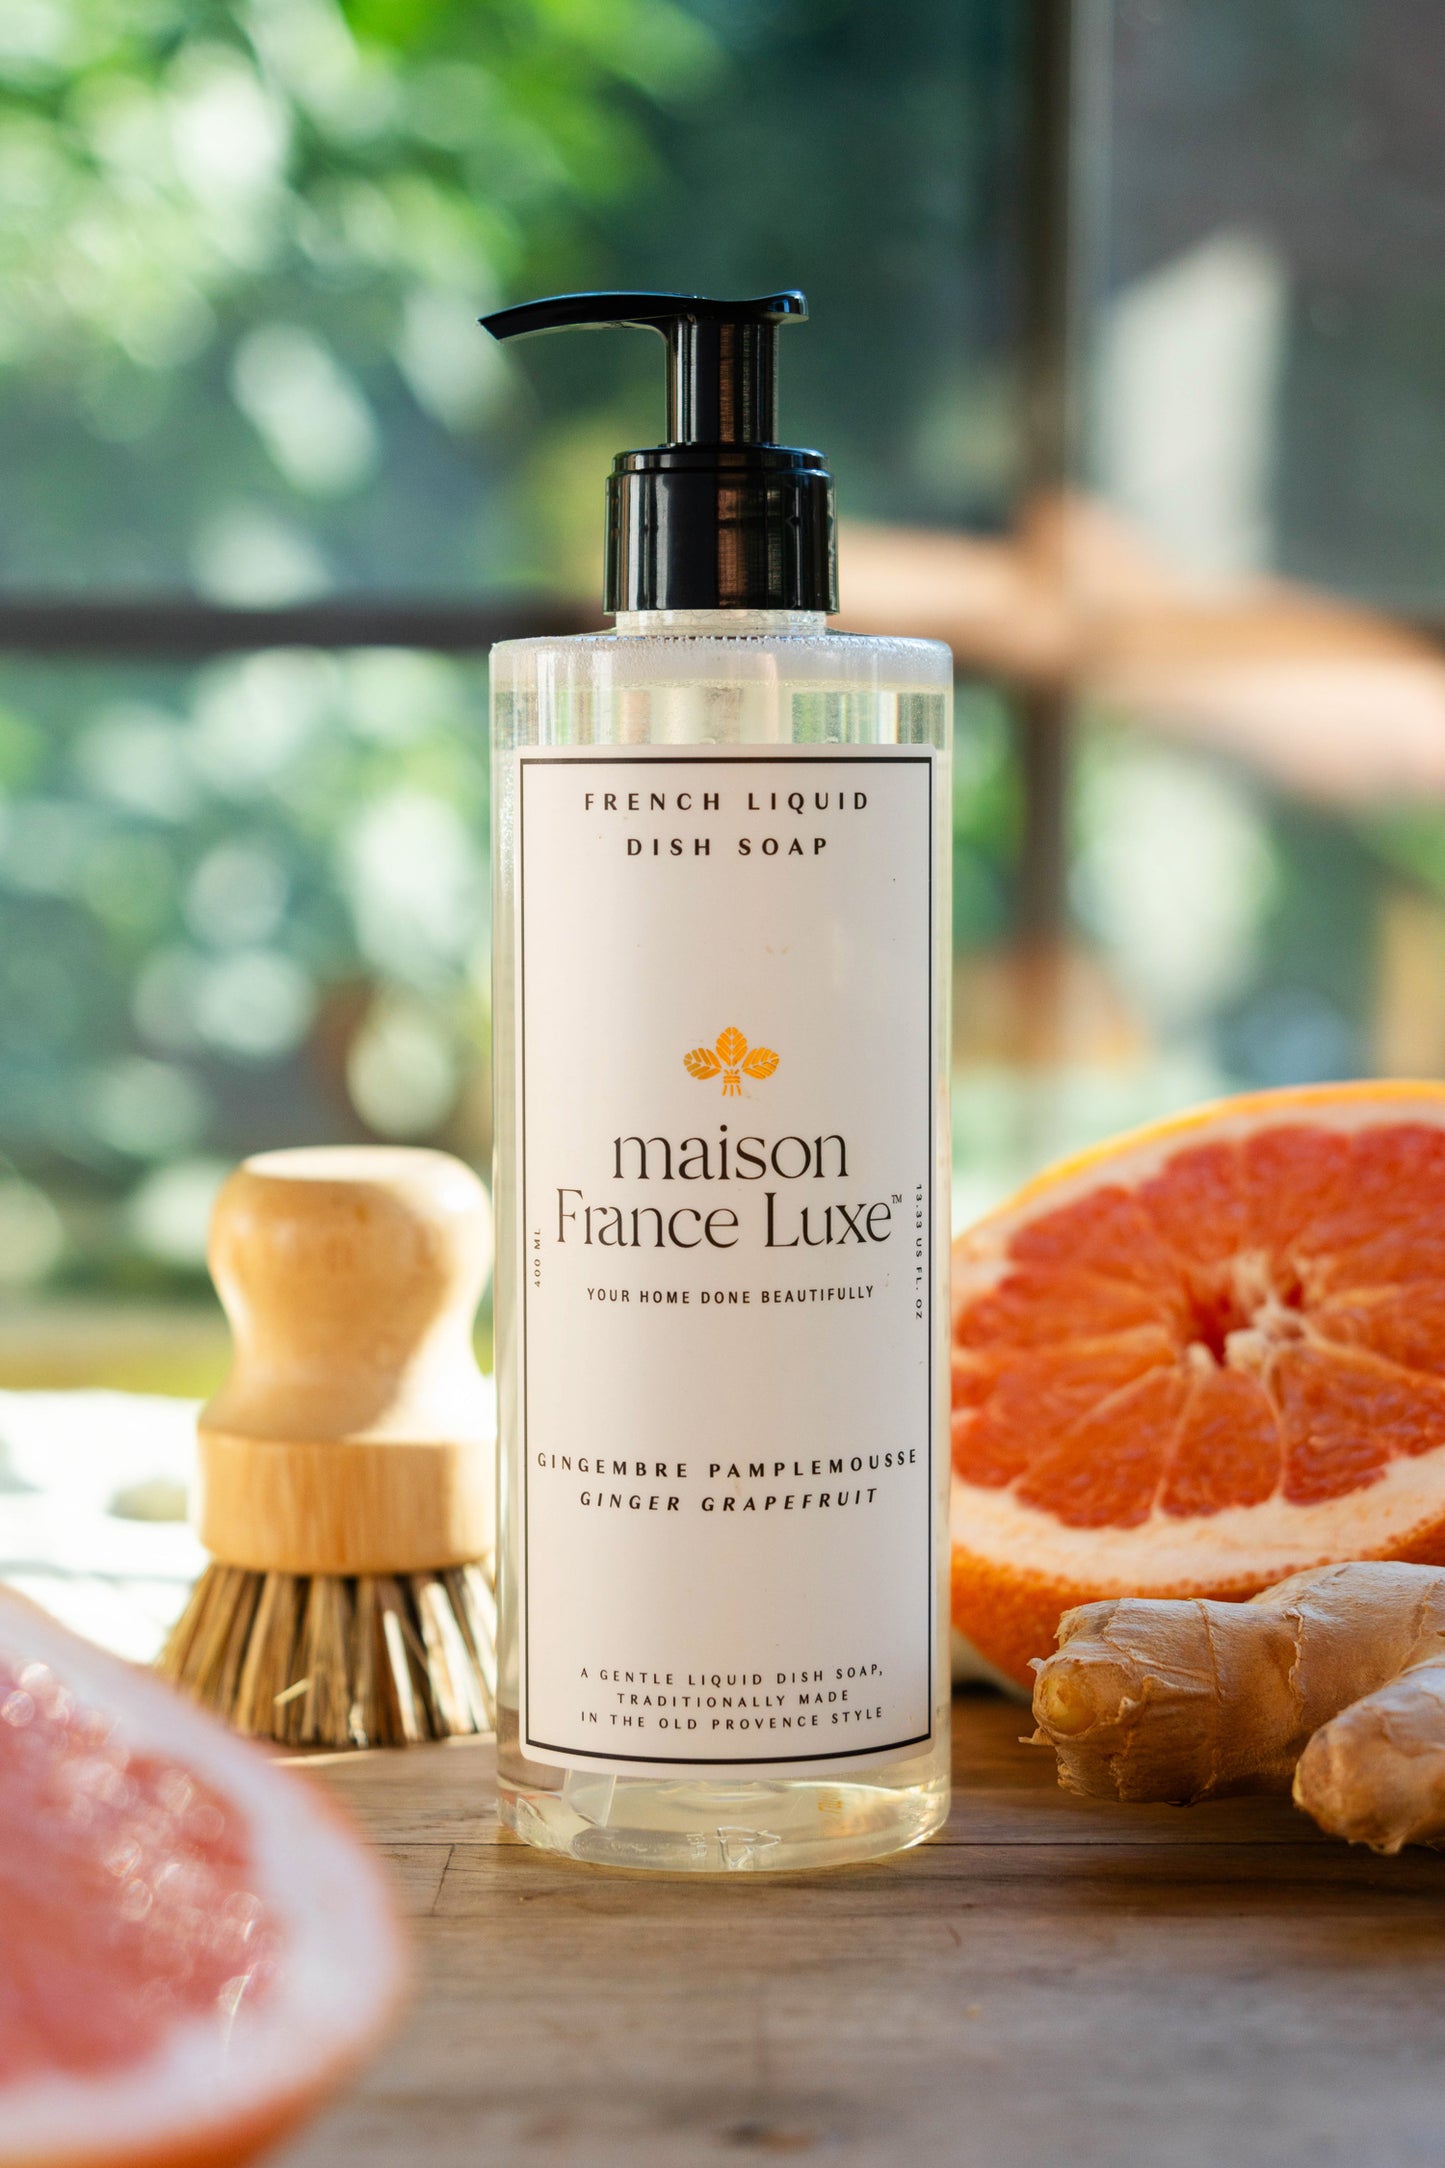 Ginger & Grapefruit natural dish soap, made in France with luxurious, plant-based ingredients.